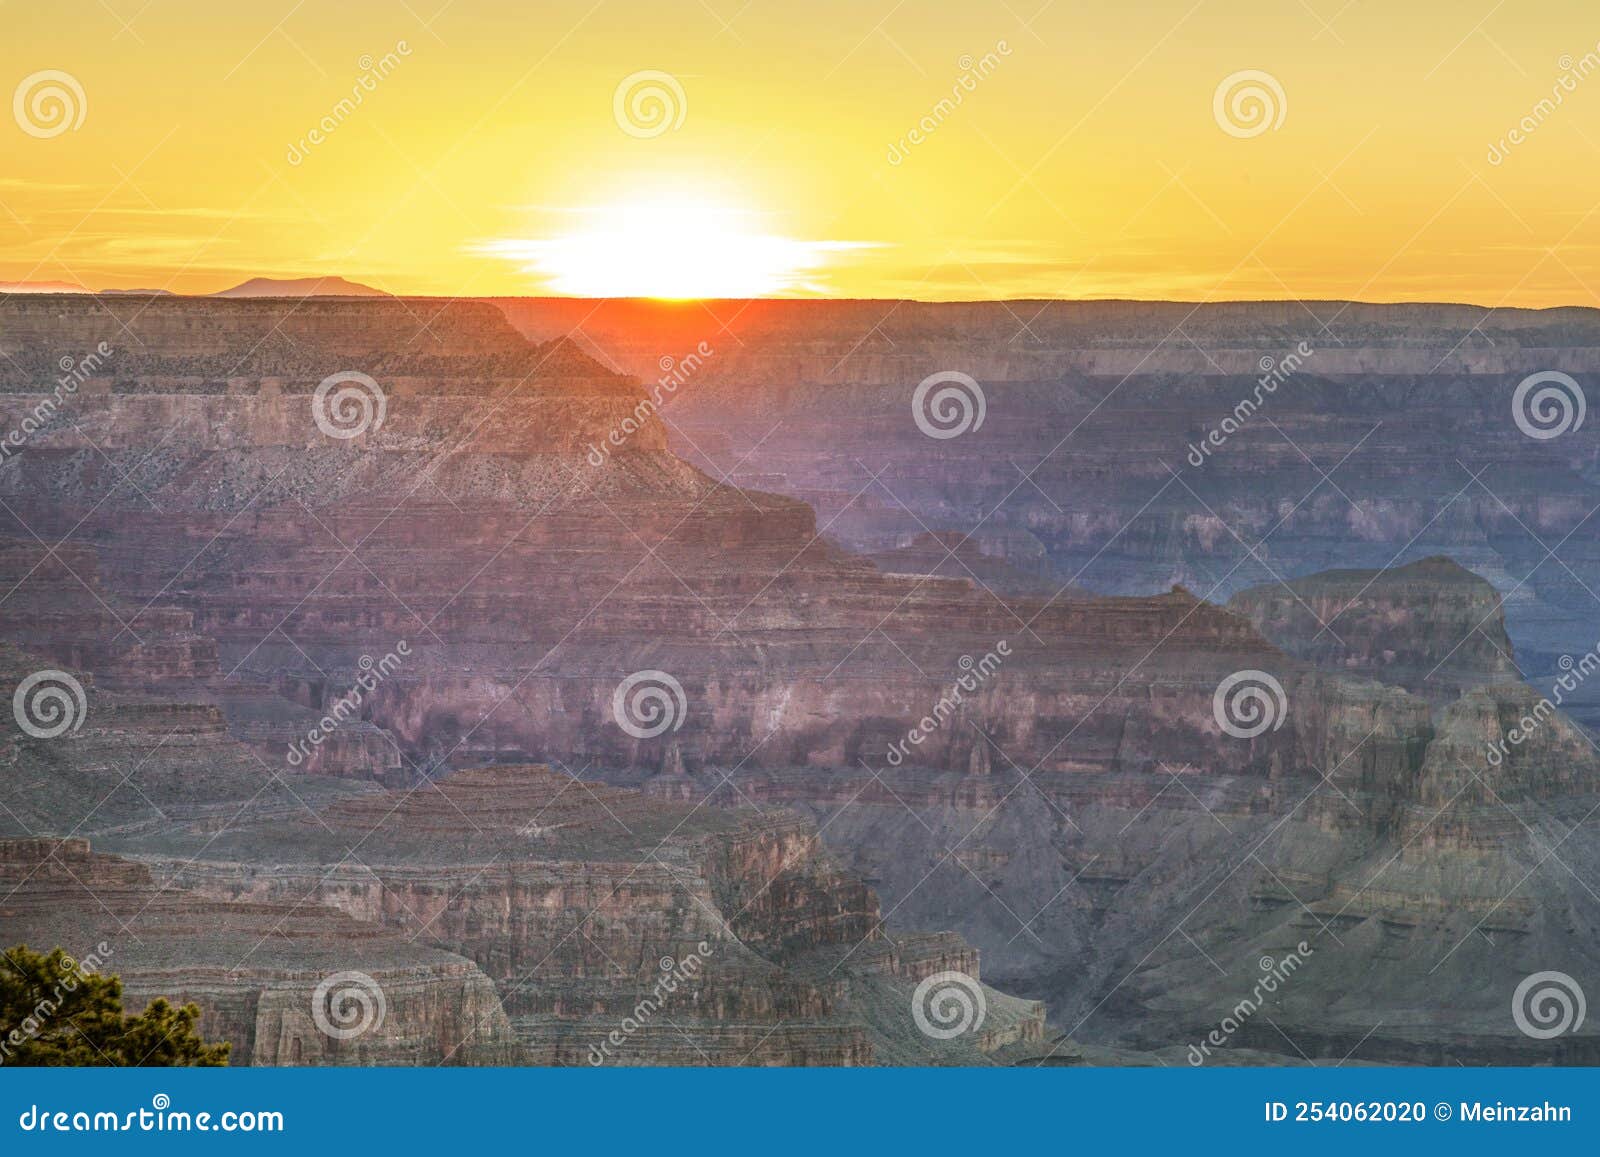 Scenic Sunset View Of The Grand Canyon Usa Stock Photo Image Of